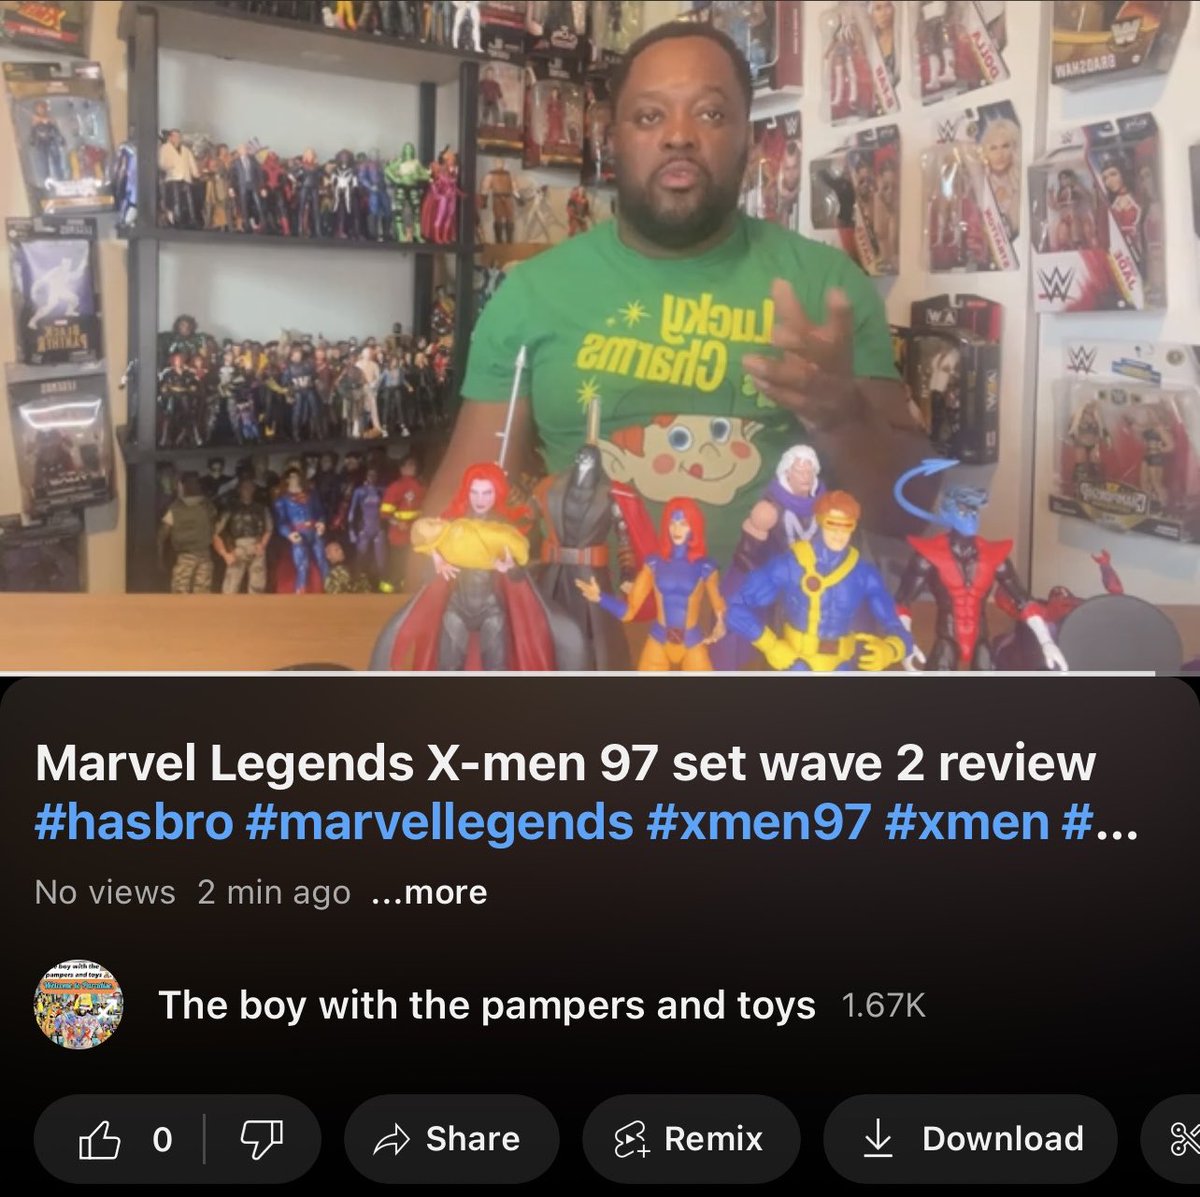 Please like, share & Subscribe today 🌎. #hasbro #xmen97 #marvellegends #youtuber #toychannel #theboywiththepampersandtoys #figurereview  #like #share #subscribe